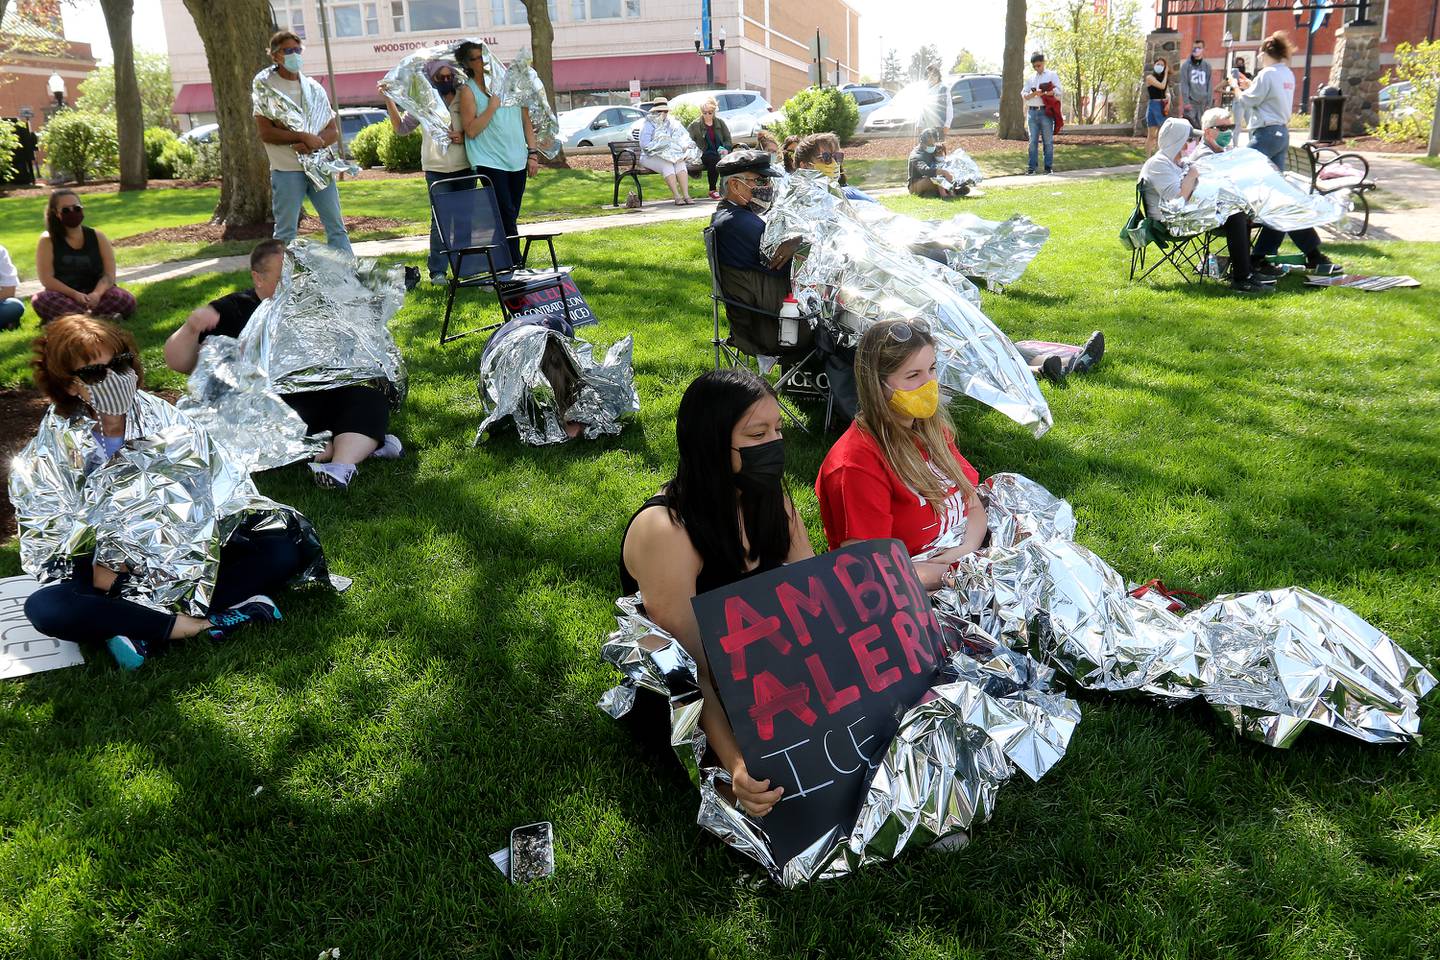 Attendees listen to speakers as some wrap themselves in a thin mylar sheet as symbolism and in solidarity with U.S. Immigration and Customs Enforcement detainees who are issued the same thin blankets while in custody. About 80 people were in attendance at the rally to end McHenry County's contract with ICE on Saturday, May 1, 2021, in Woodstock.